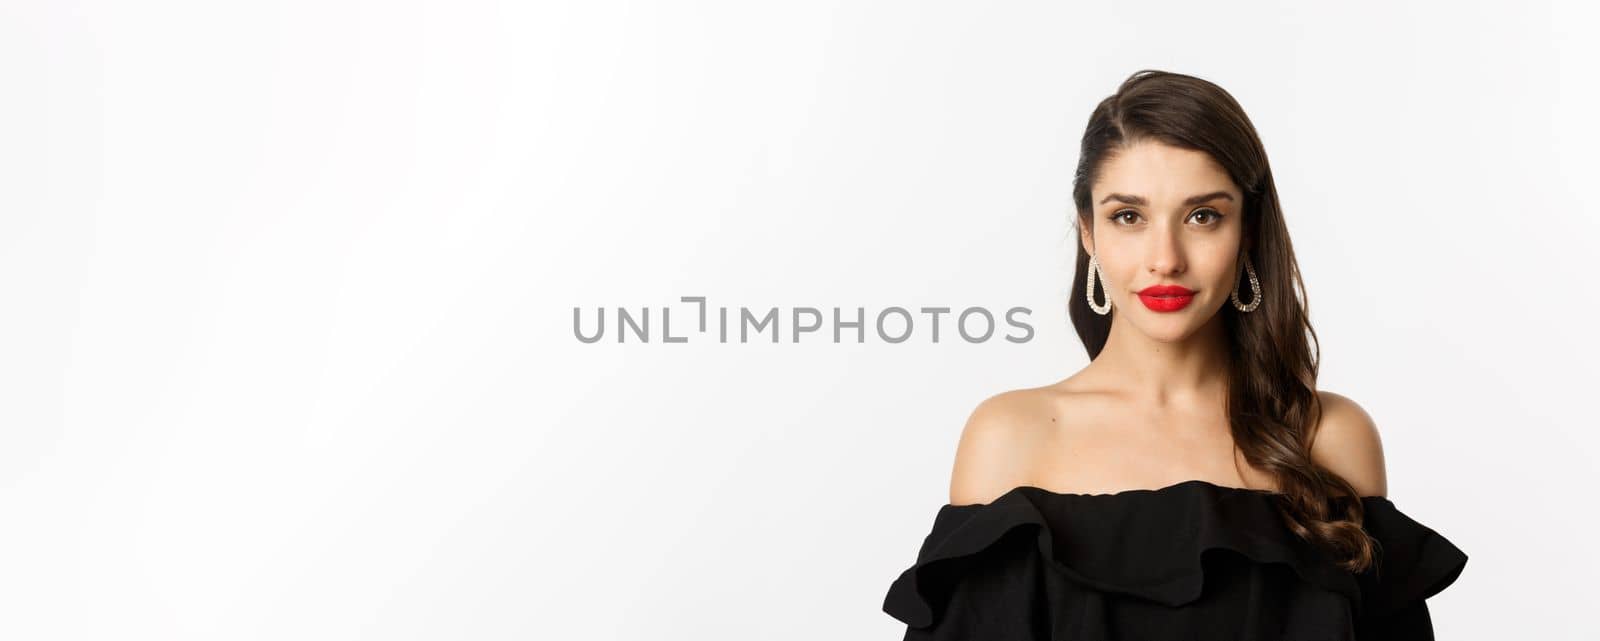 Fashion and beauty concept. Close-up of elegant brunette woman with earrings, wearing black dress and red lipstick, looking sensual at camera, standing over white background.